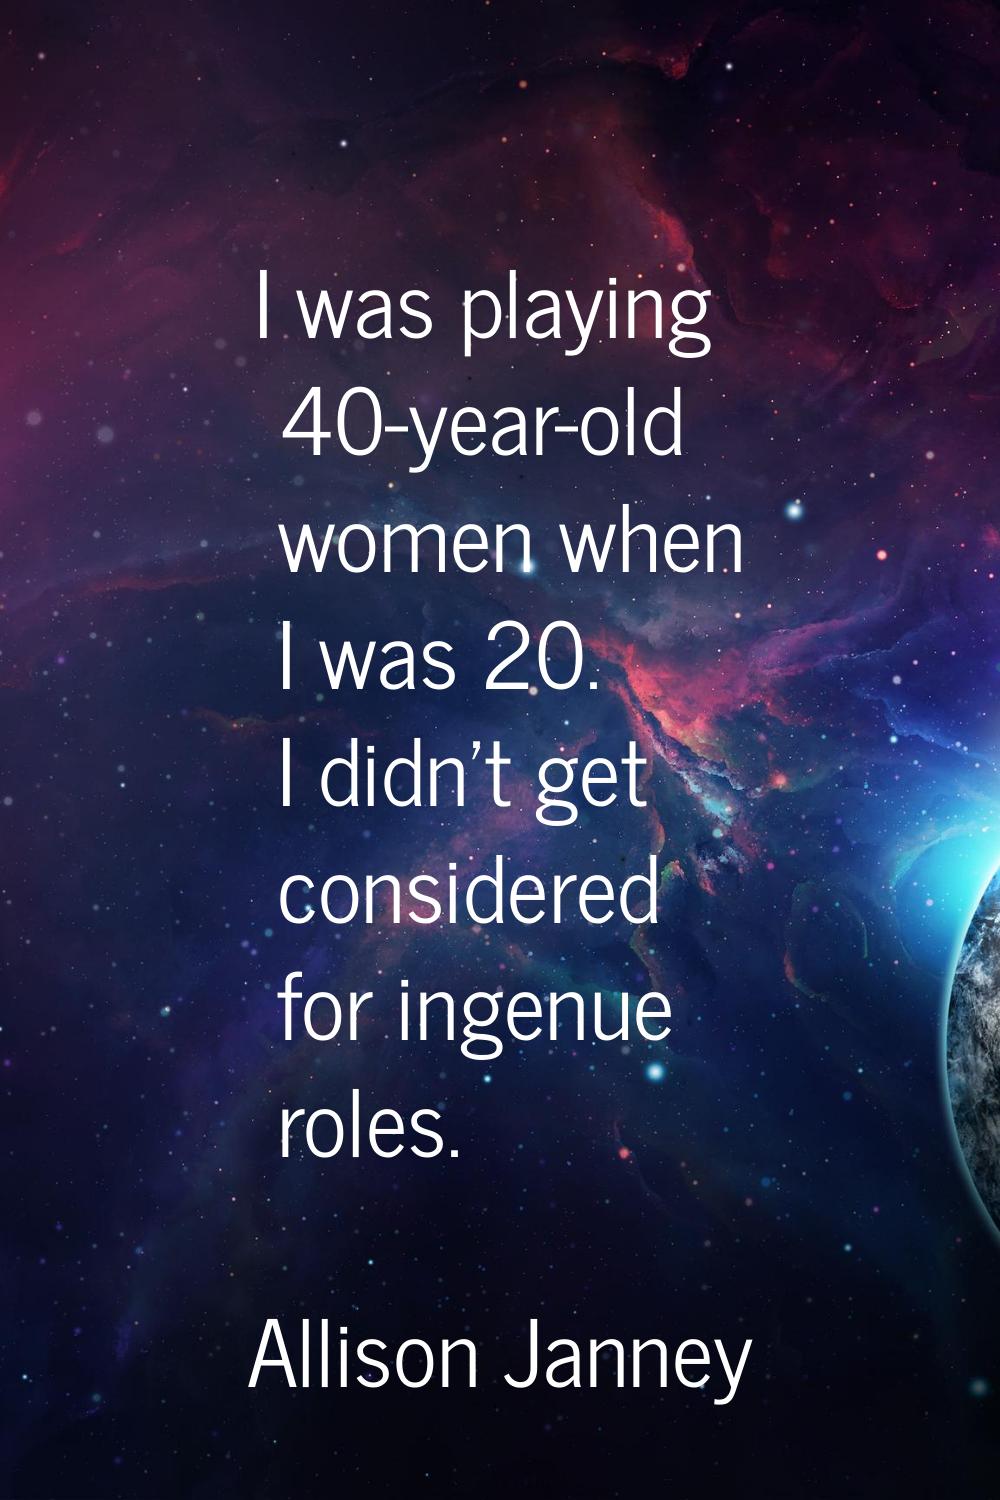 I was playing 40-year-old women when I was 20. I didn't get considered for ingenue roles.